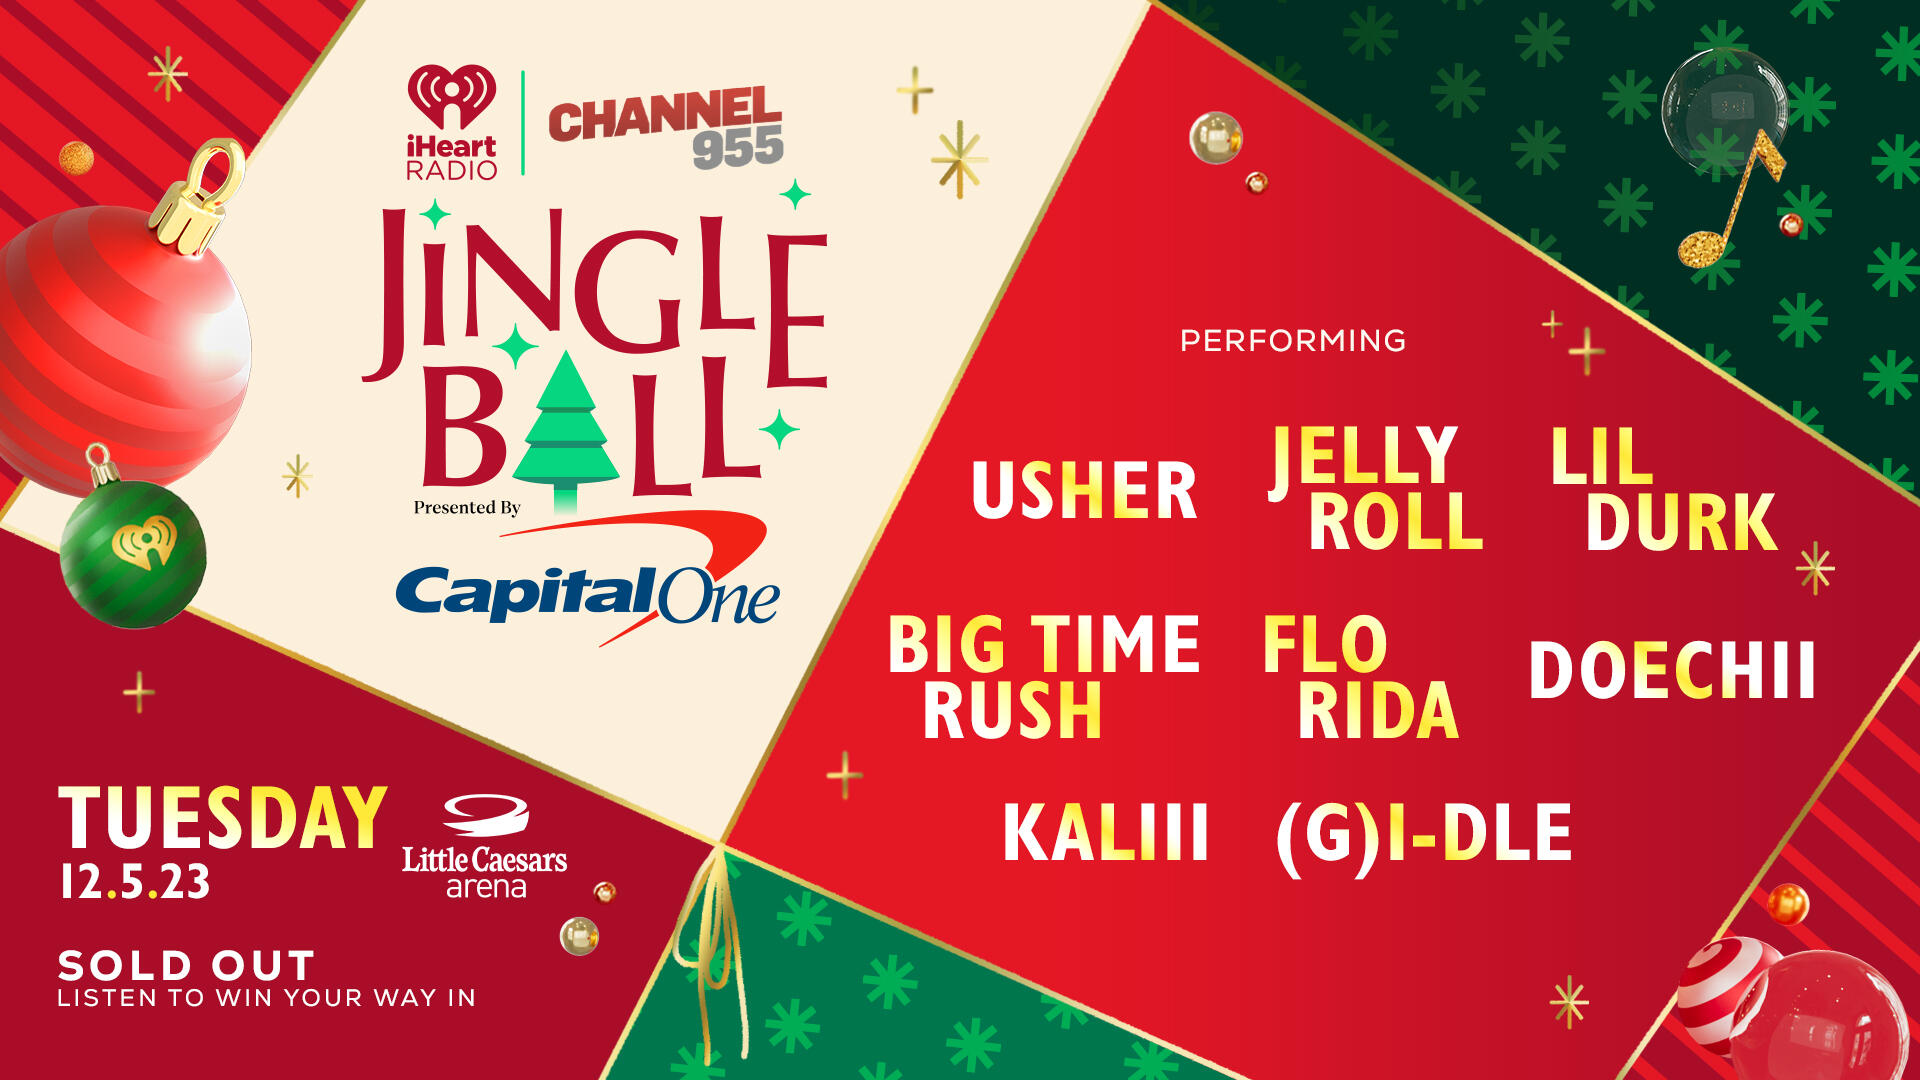 Our 2022 #955JingleBall SOLD OUT Graphic